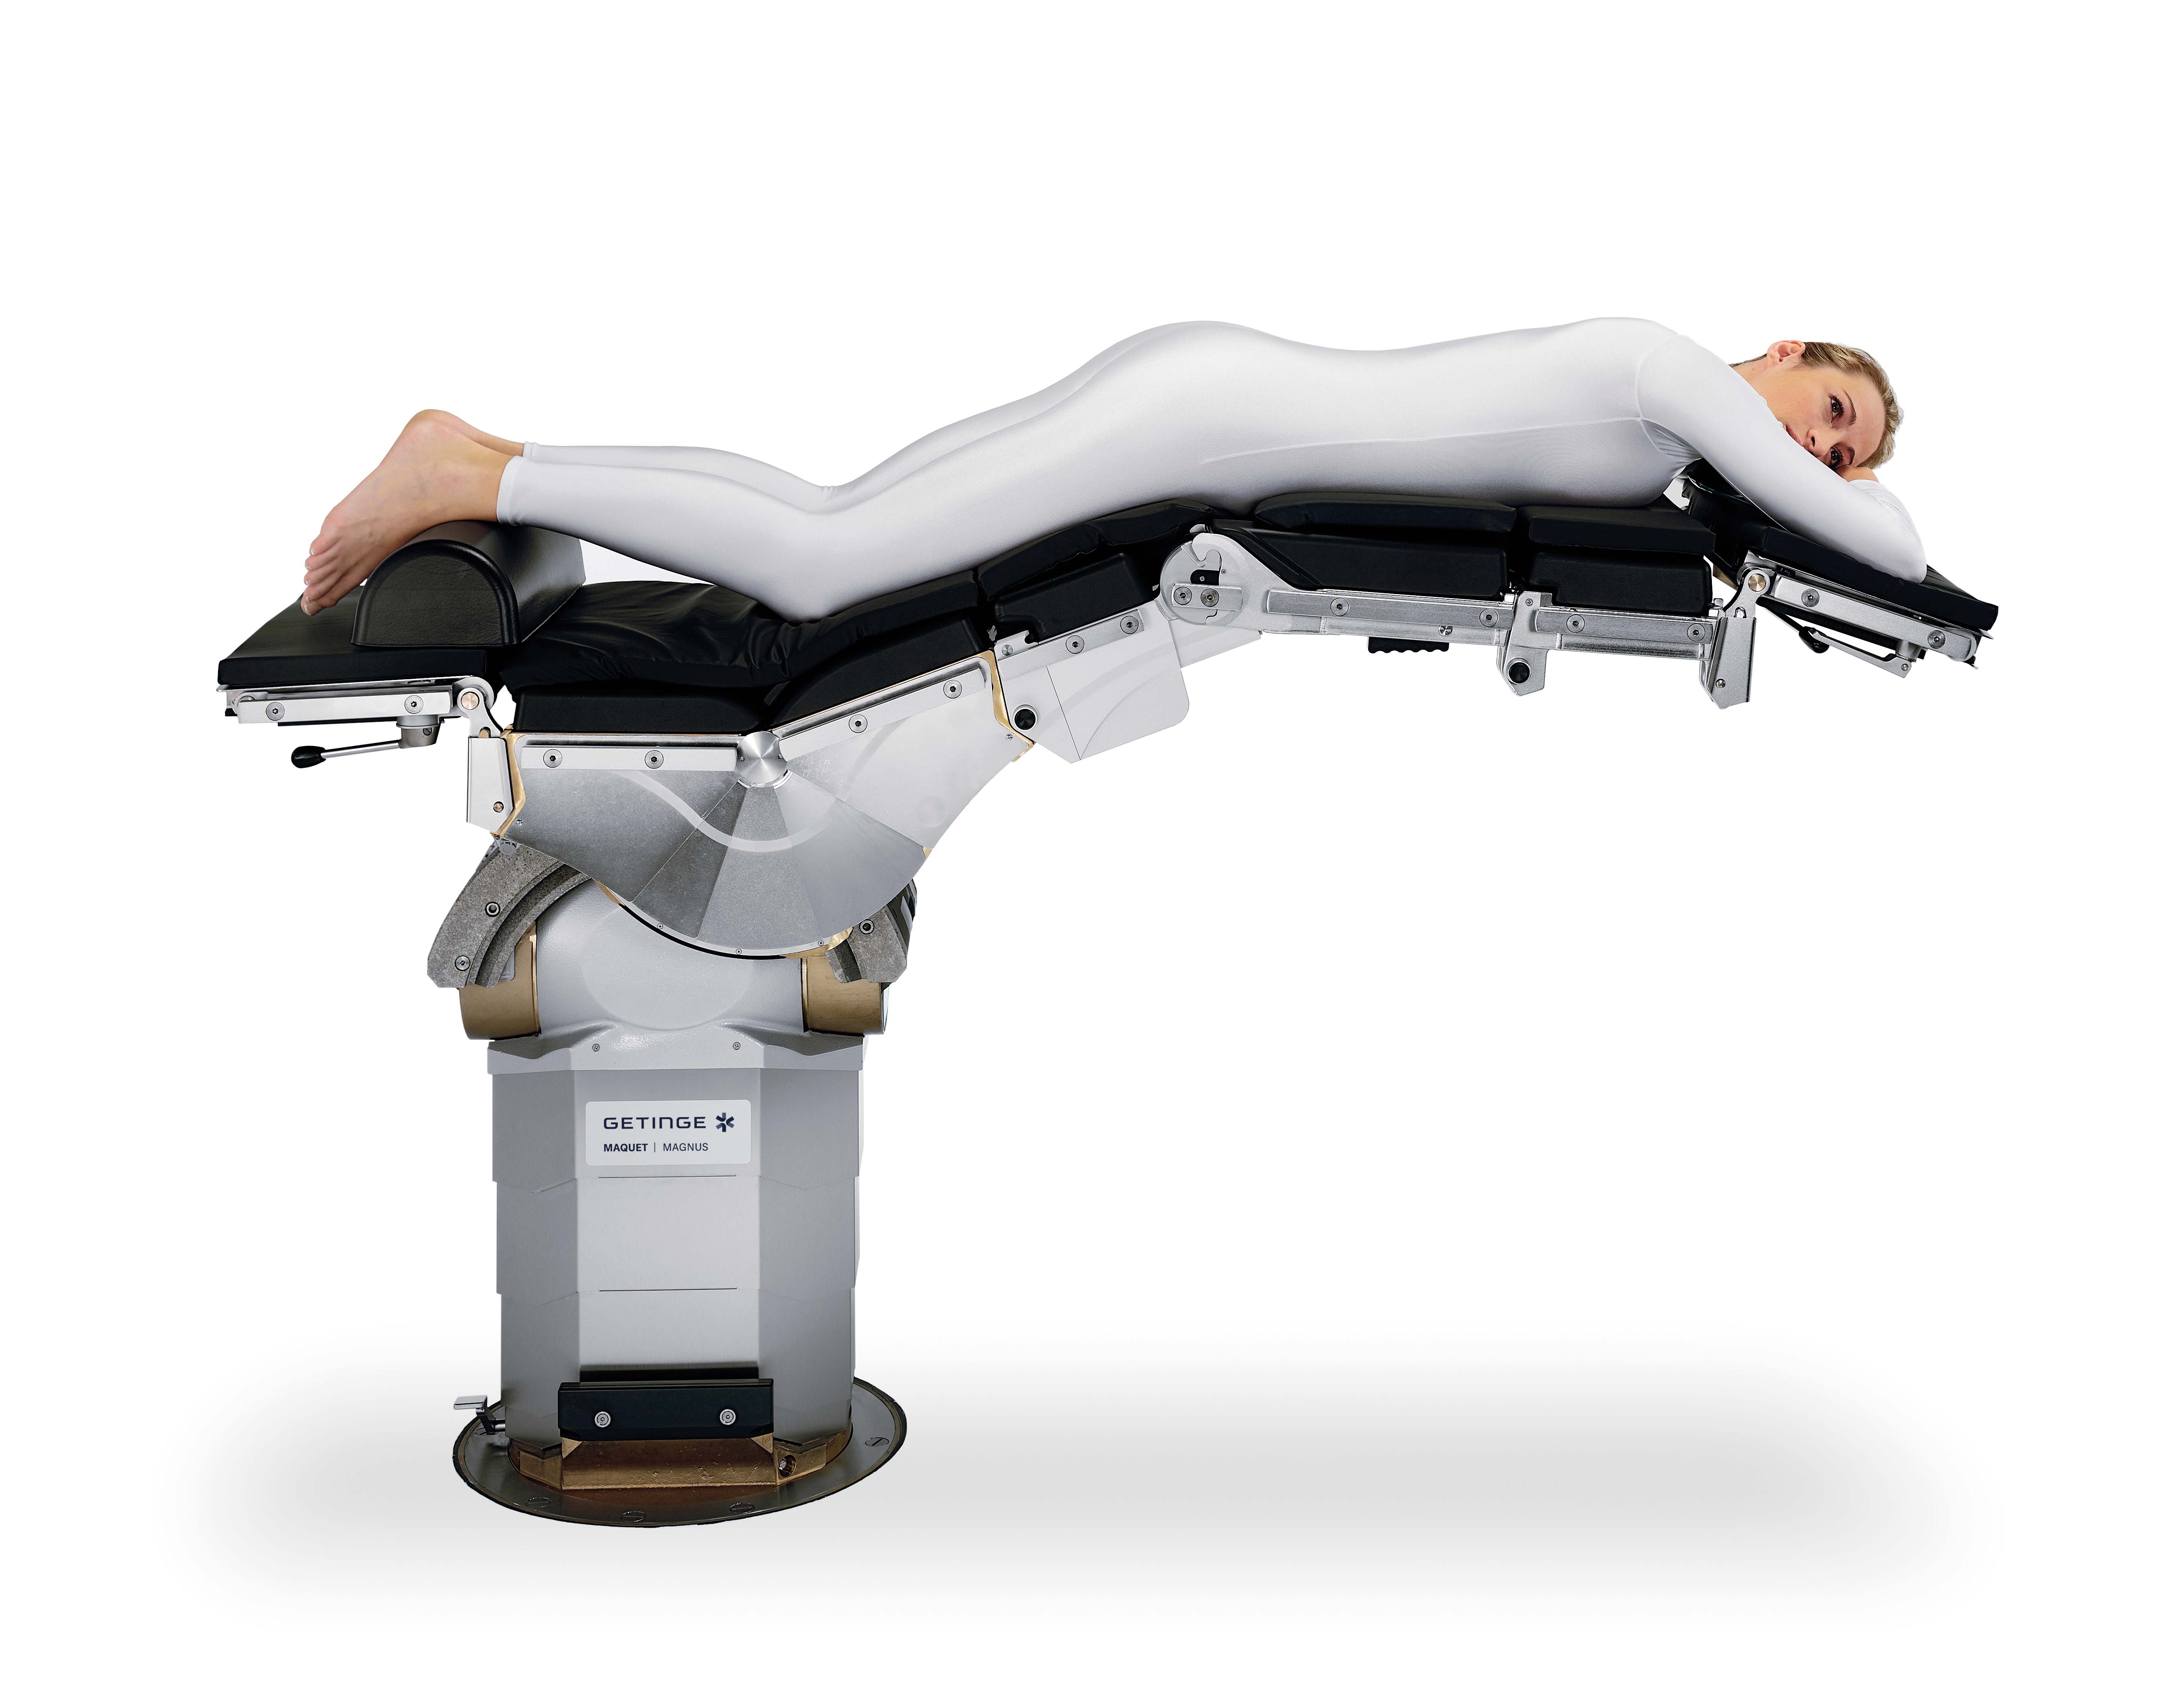 Spinal surgery in prone position with optimum access for the c-arm